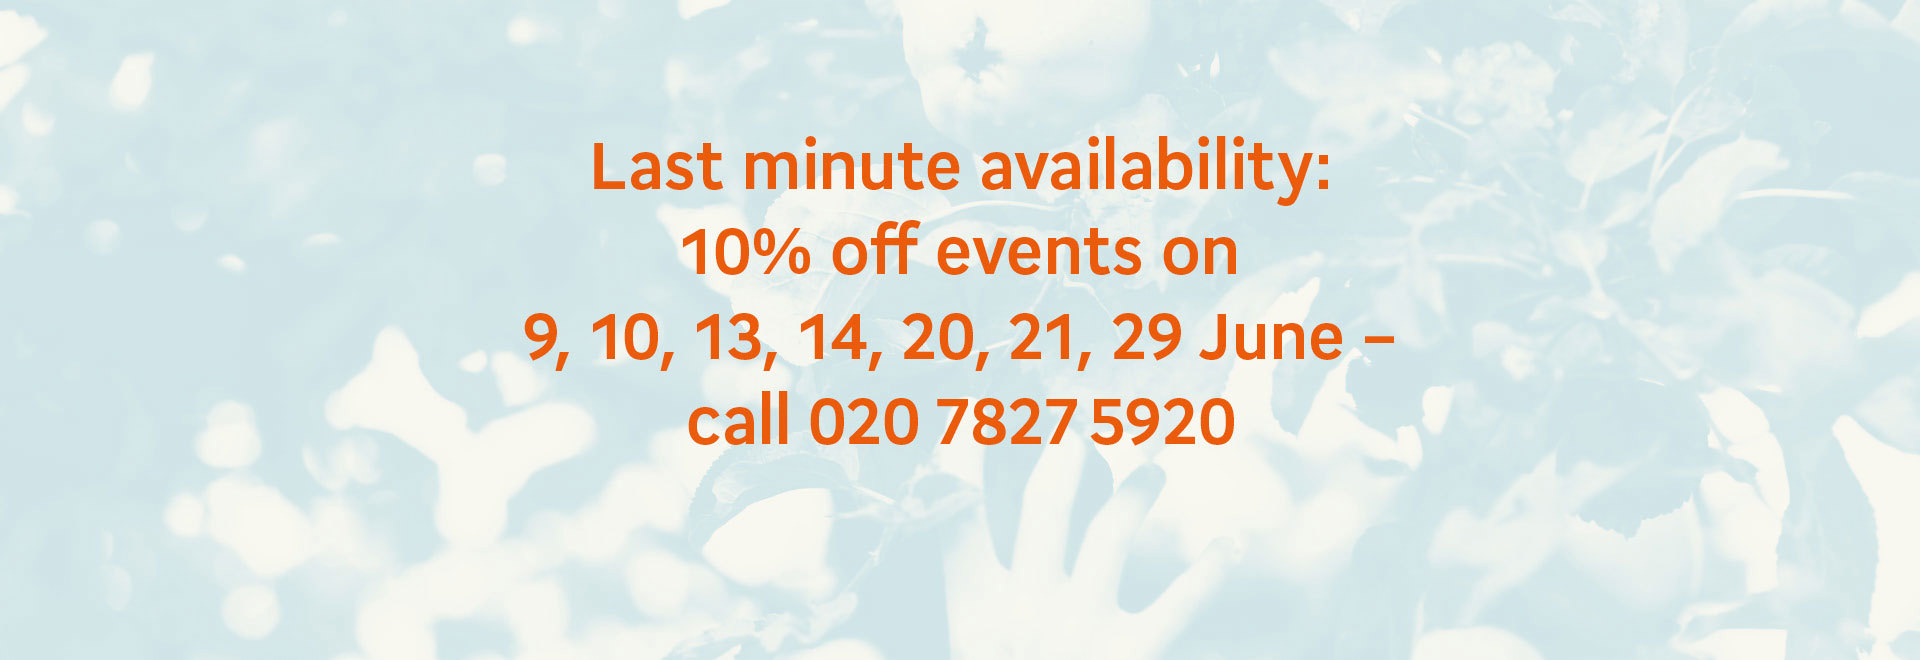 Last minute availability: 10% off events booked on 9, 10, 13, 14, 20, 21 and 29 June - call 020 7827 5920